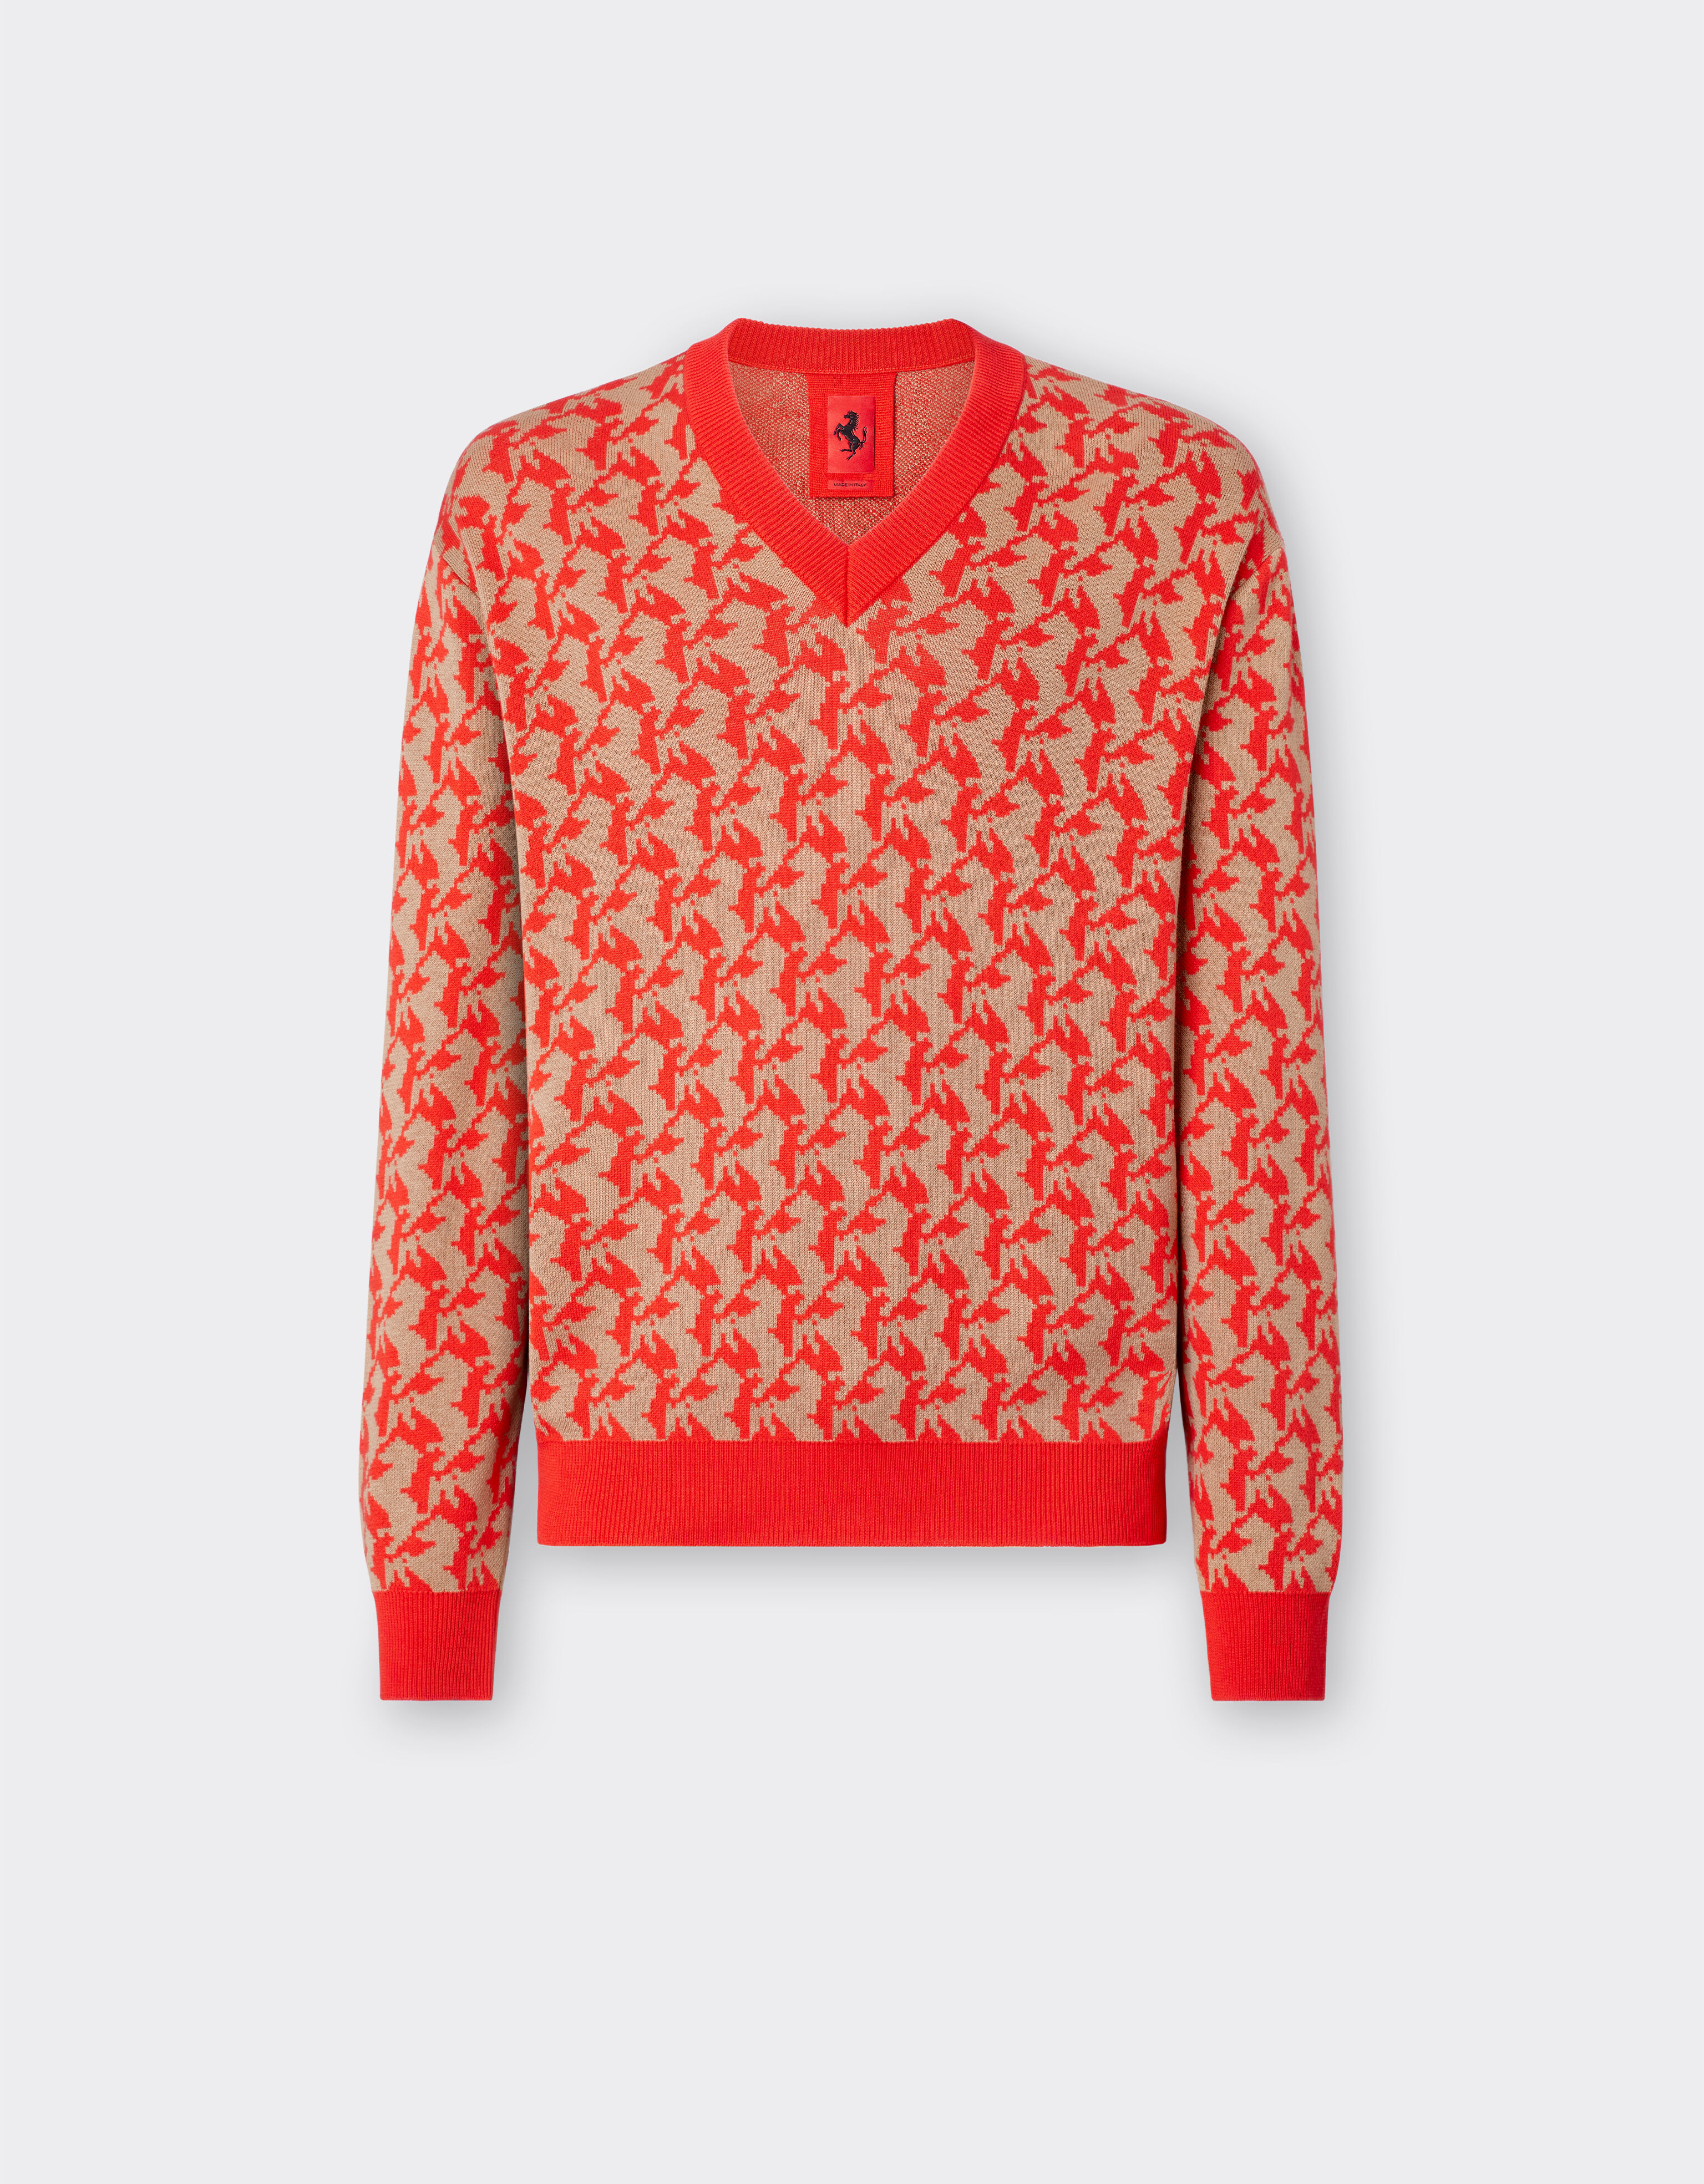 Ferrari Jumper in silk and cotton with Prancing Horse pattern Rosso Dino 20132f